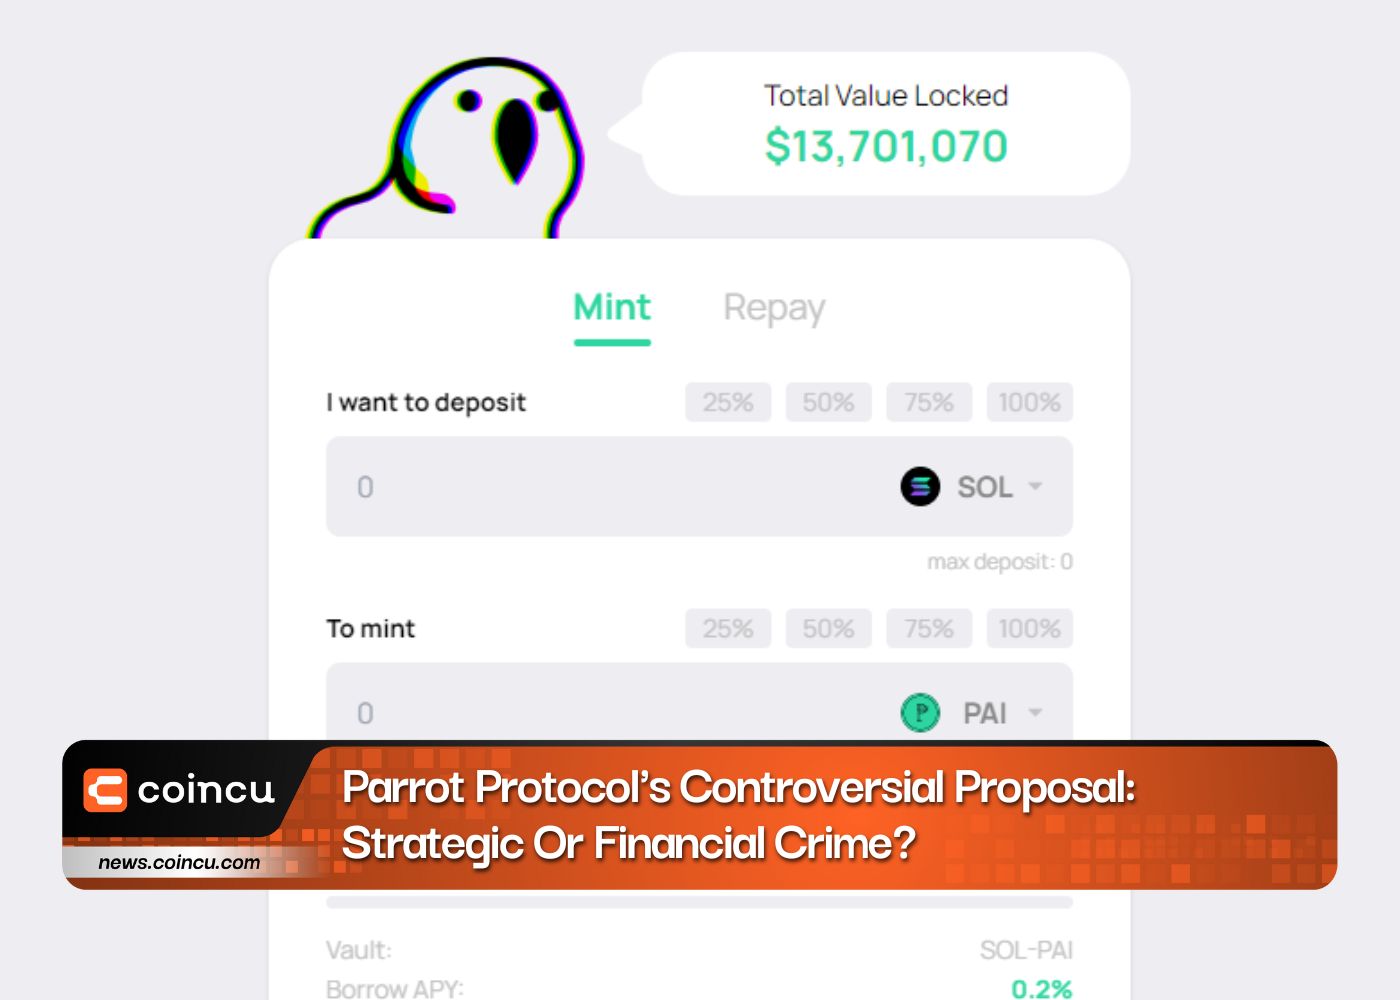 Parrot Protocol's Controversial Proposal: Strategic Or Financial Crime?